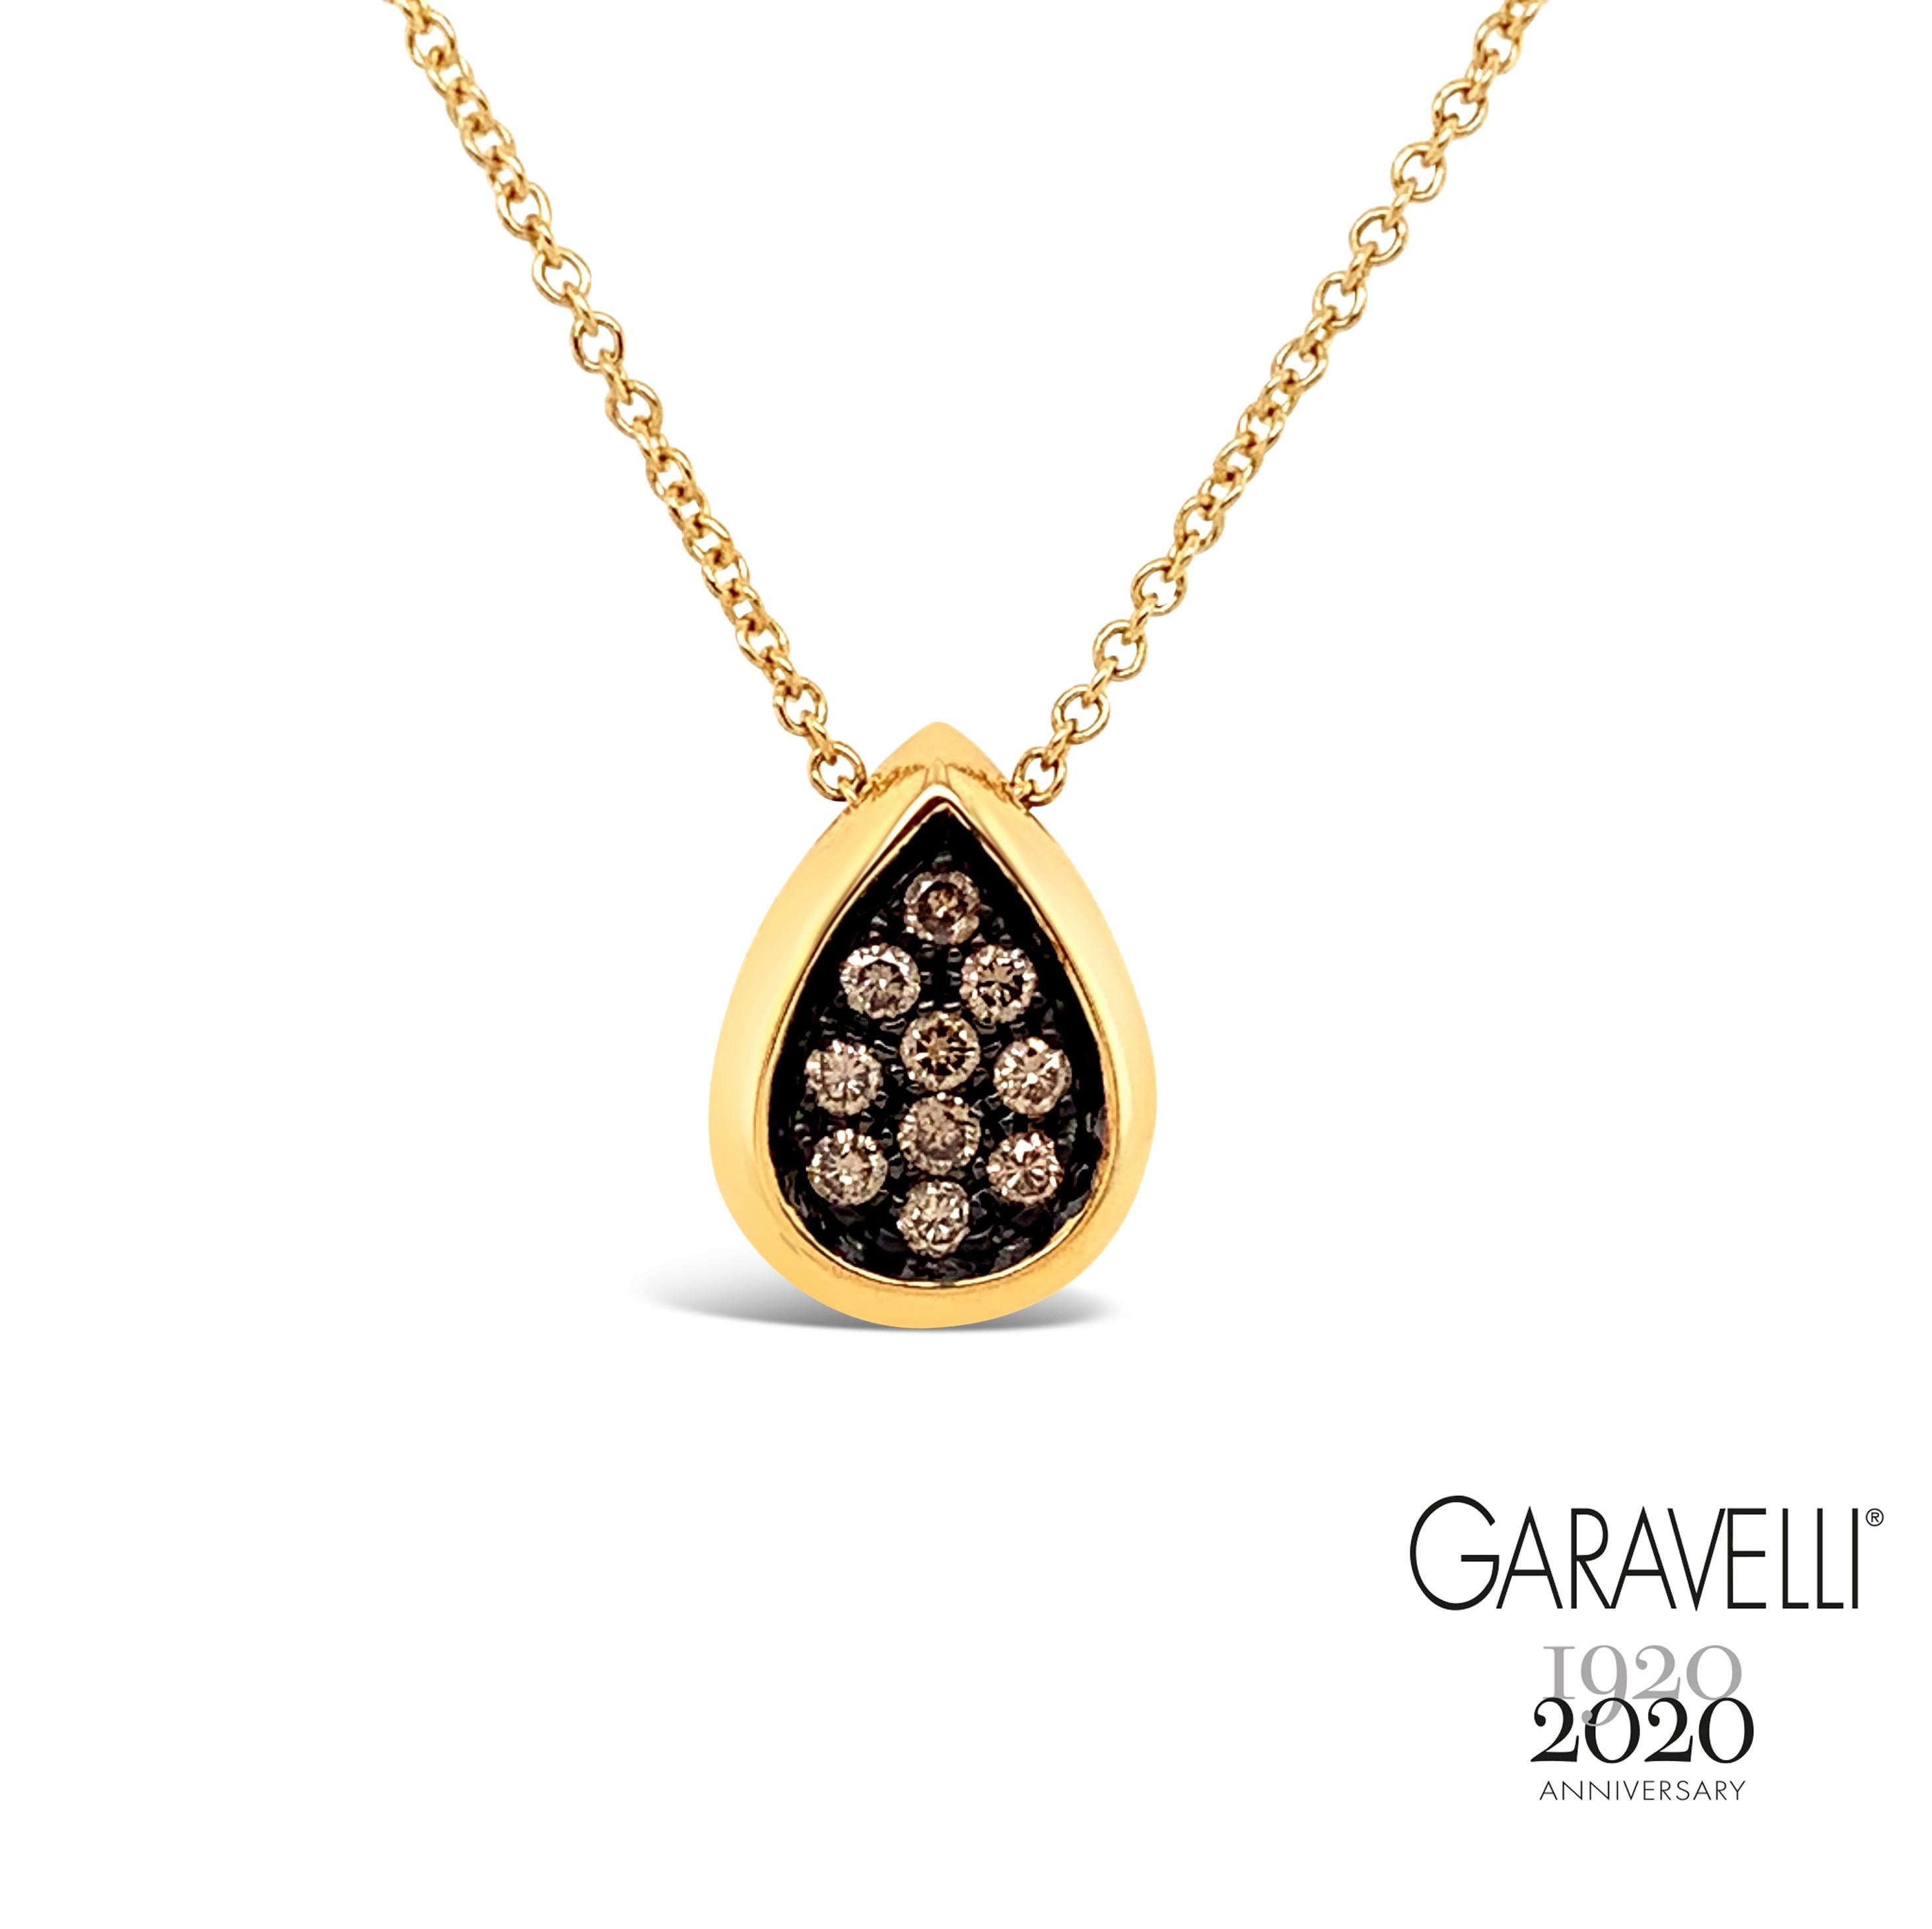 Garavelli DROP Pendant in 18kt Gold with Rubies 
The new Giotto Collection DROP pendant .
Featuring at your choice: Rubies, Orange Sapphires, Brown Diamonds, Aquamarine,   or Peridot 
18kt gold Necklace included , lenght 19 inches with a loop at 17